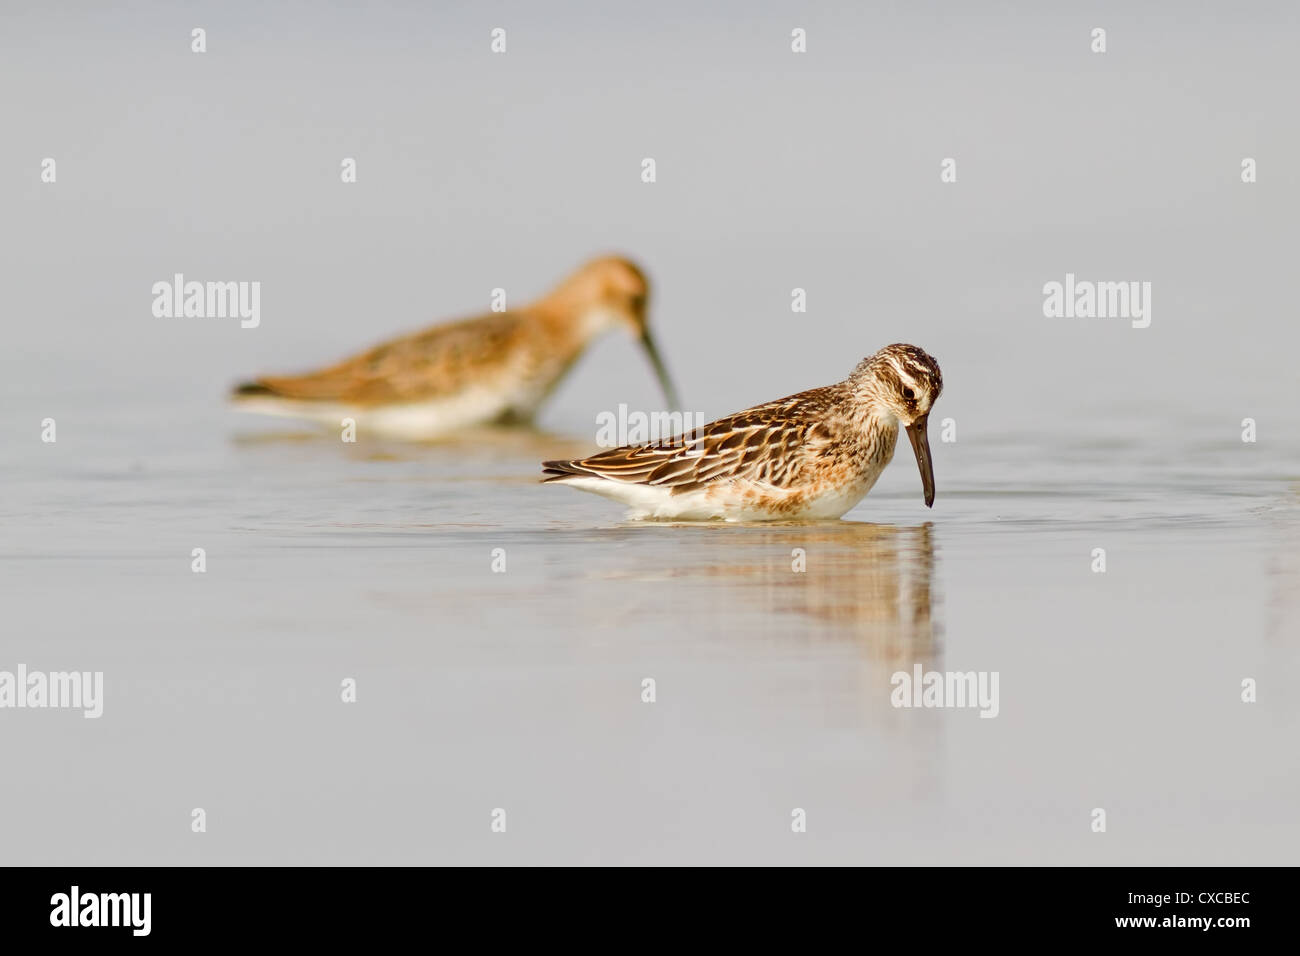 A Broad-billed Sandpiper (Limicola falcinellus) with a de-focused Dunlin (Calidris alpina) in the background Stock Photo